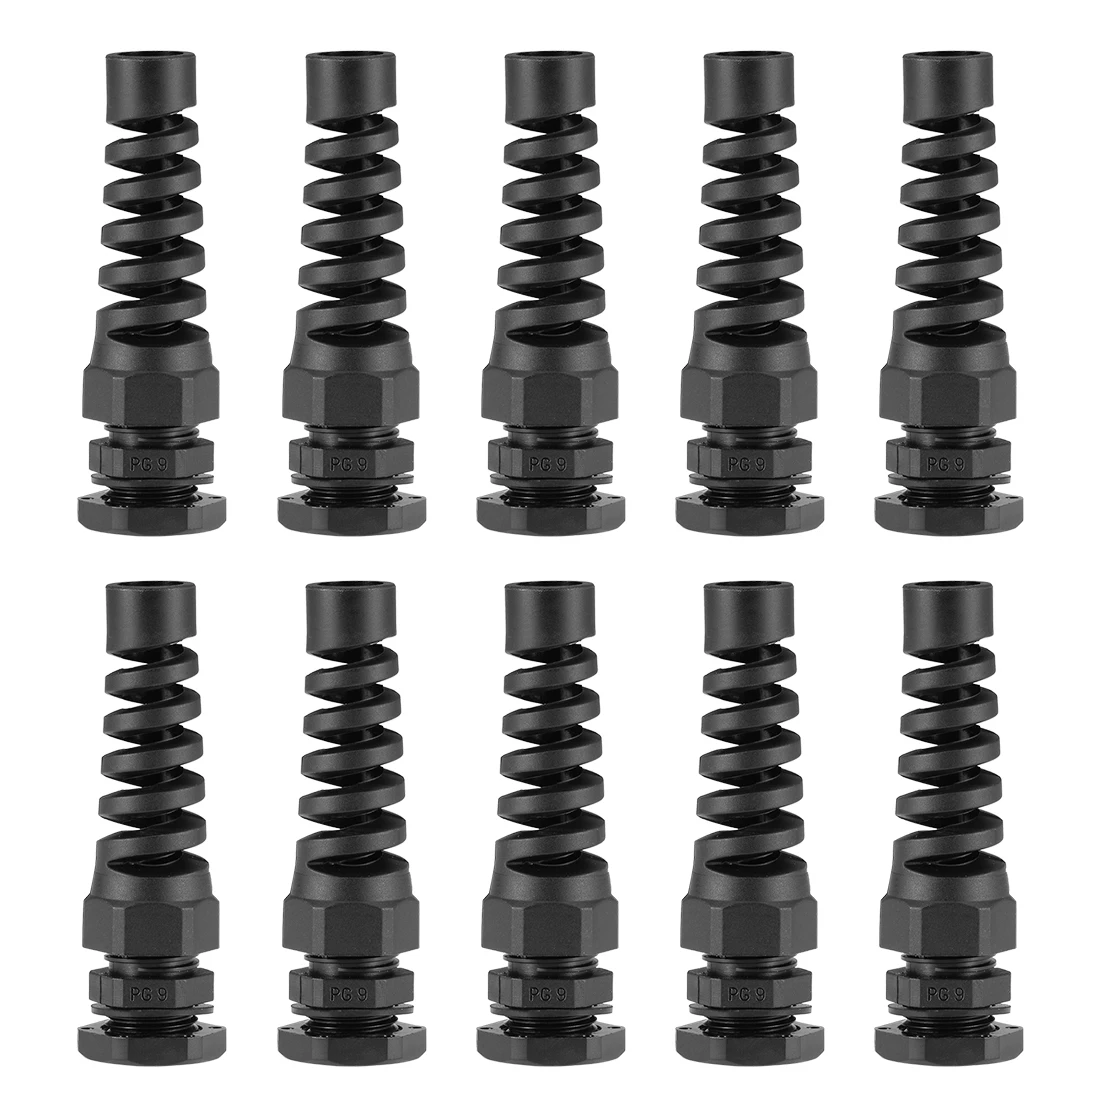 

uxcell Cable Gland Waterproof IP68 Nylon Adjustable Locknut with Strain Relief 10pcs